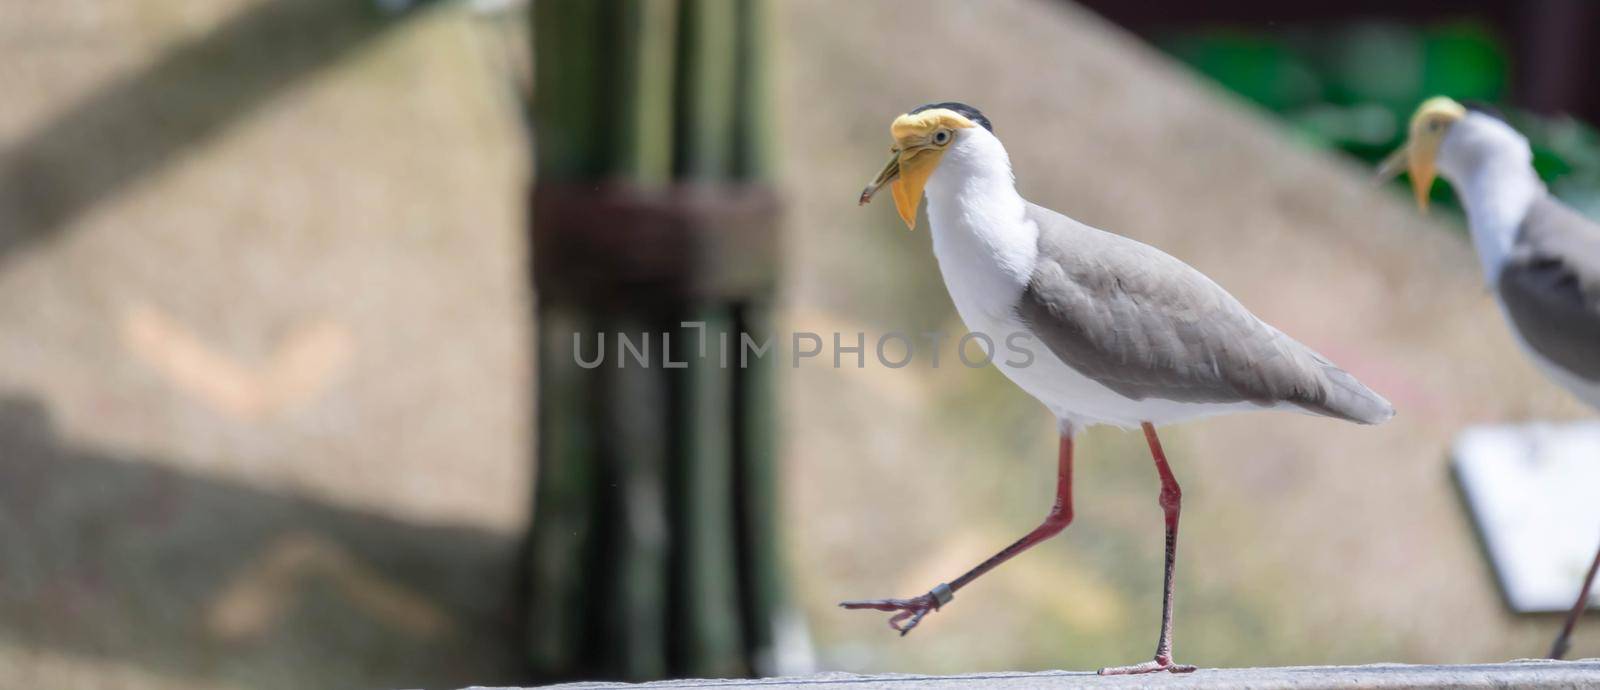 Masked lapwing (Vanellus miles), commonly referred to as a plover and well known for its swooping defence of its nest.